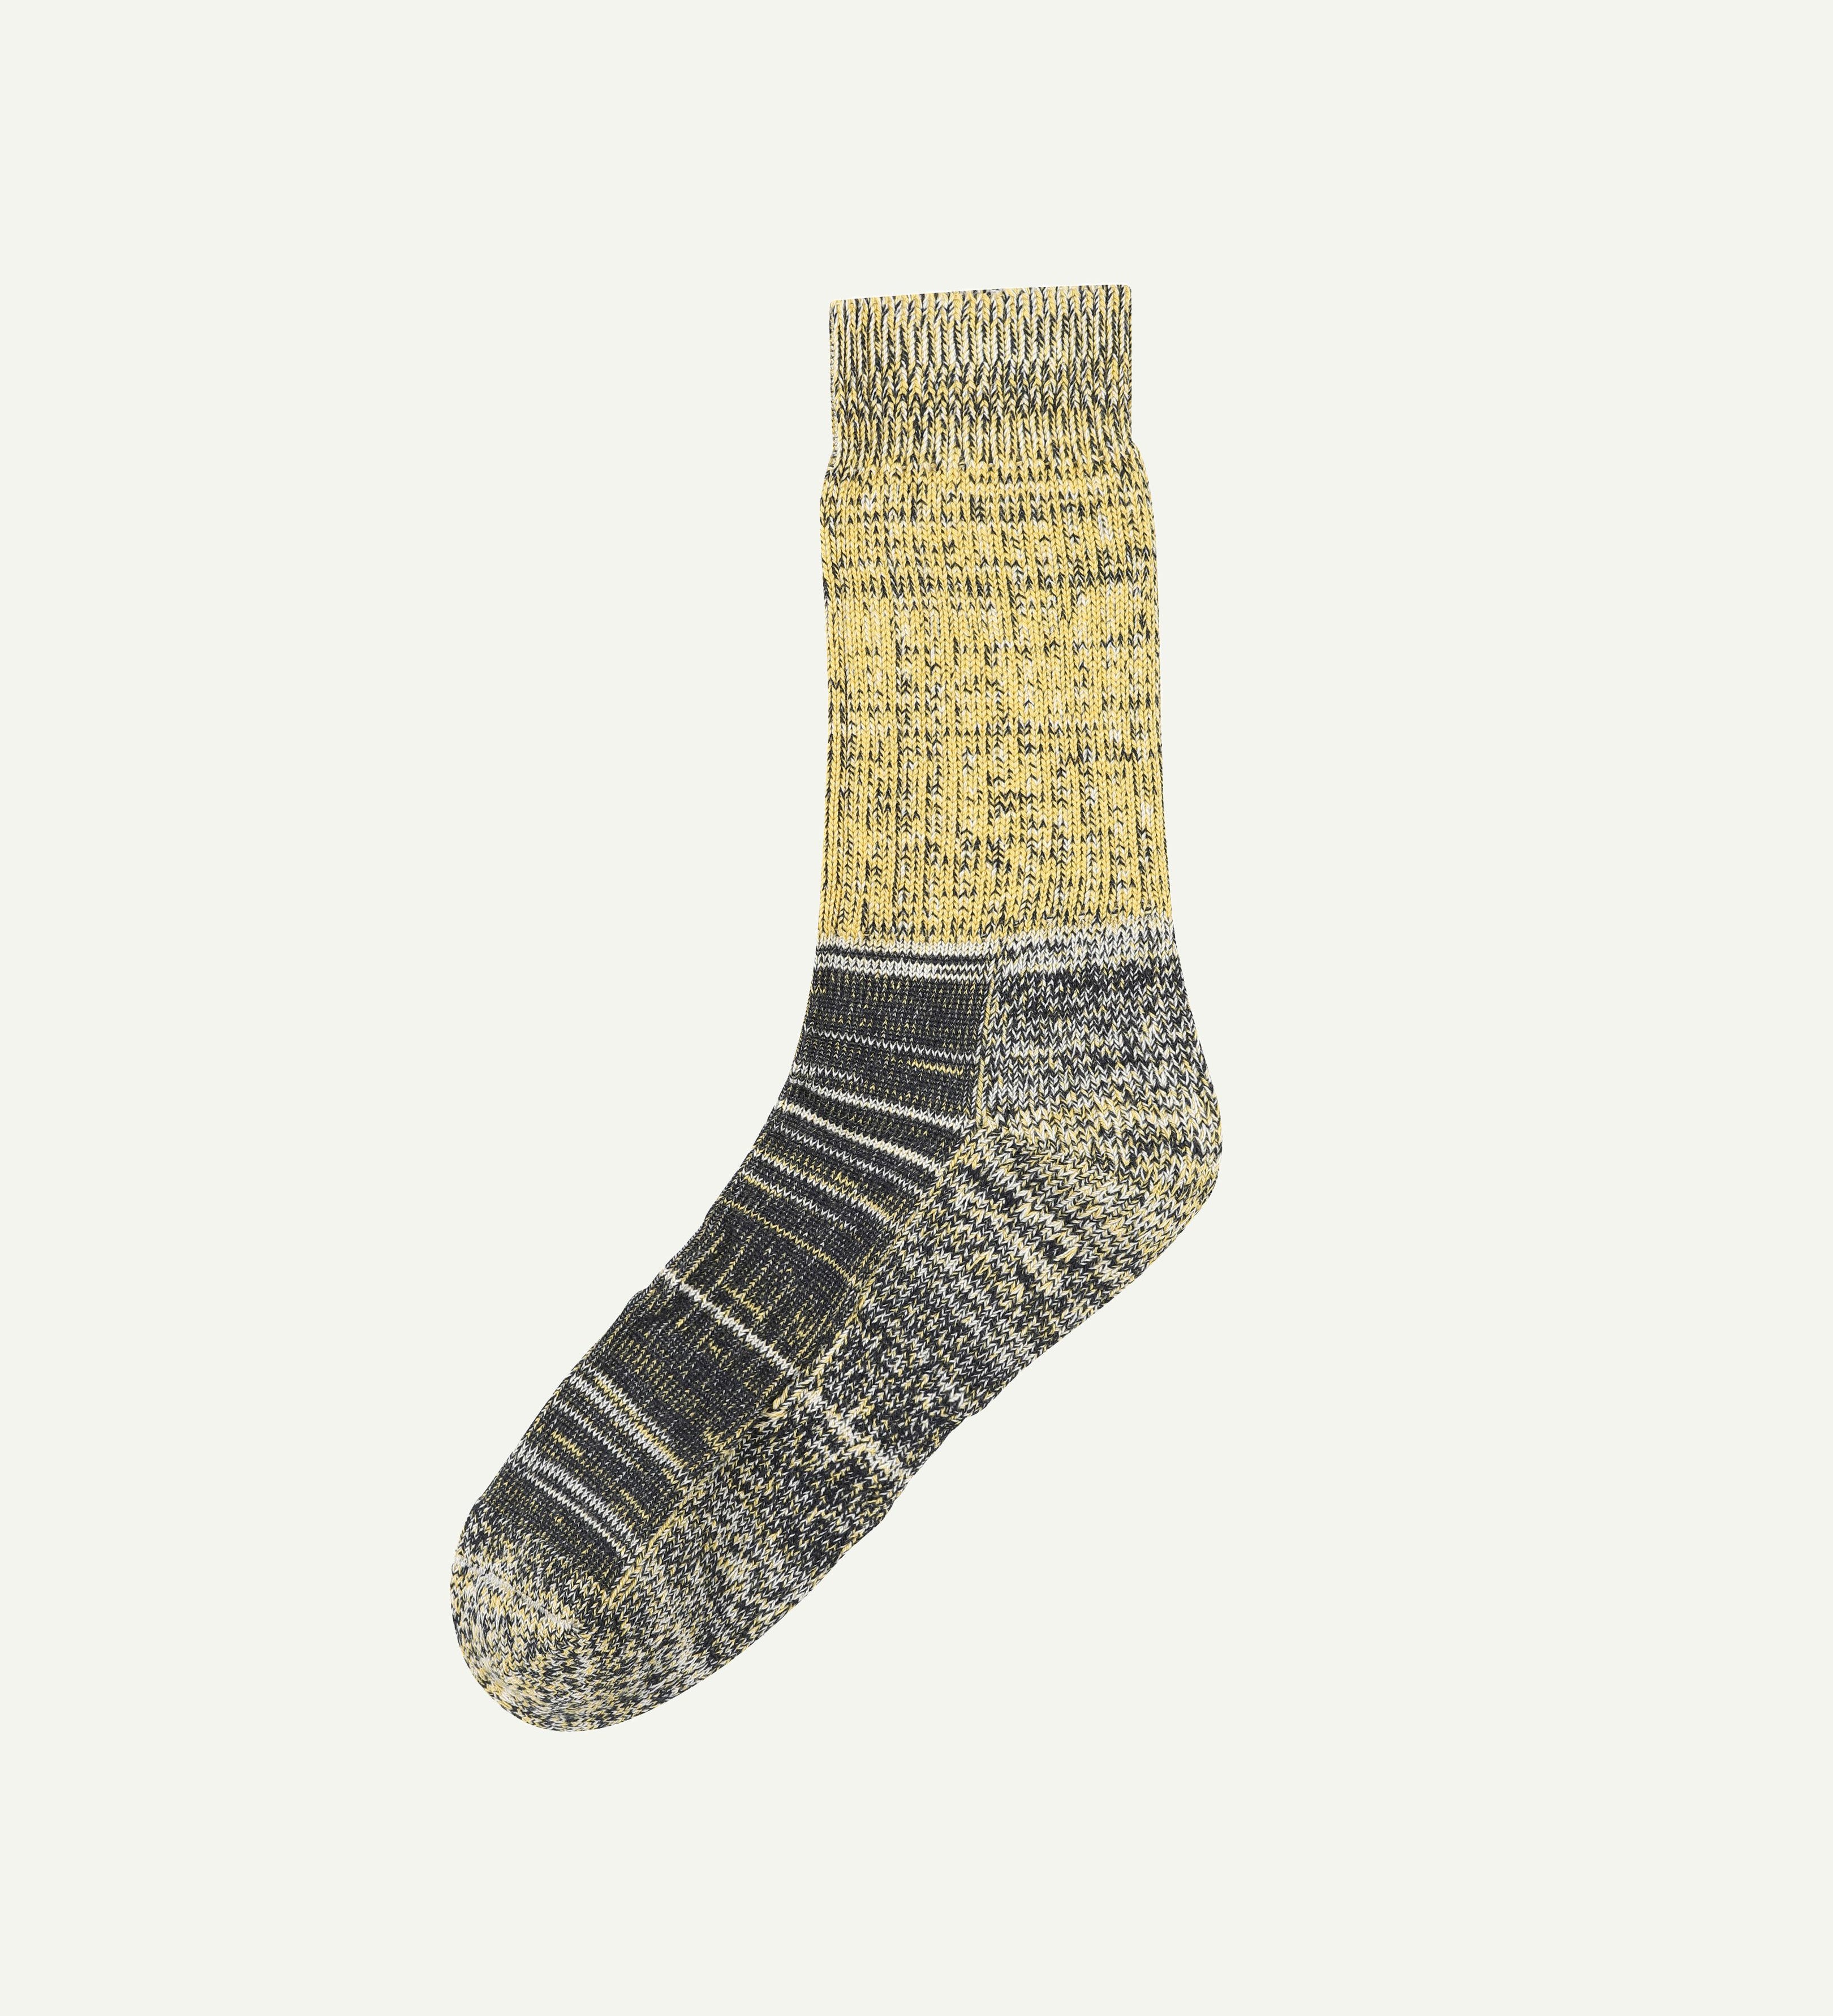 Flat view of Uskees 4006 grapefruit mix organic cotton sock, showing bands of grapefruit-yellow, black and beige.